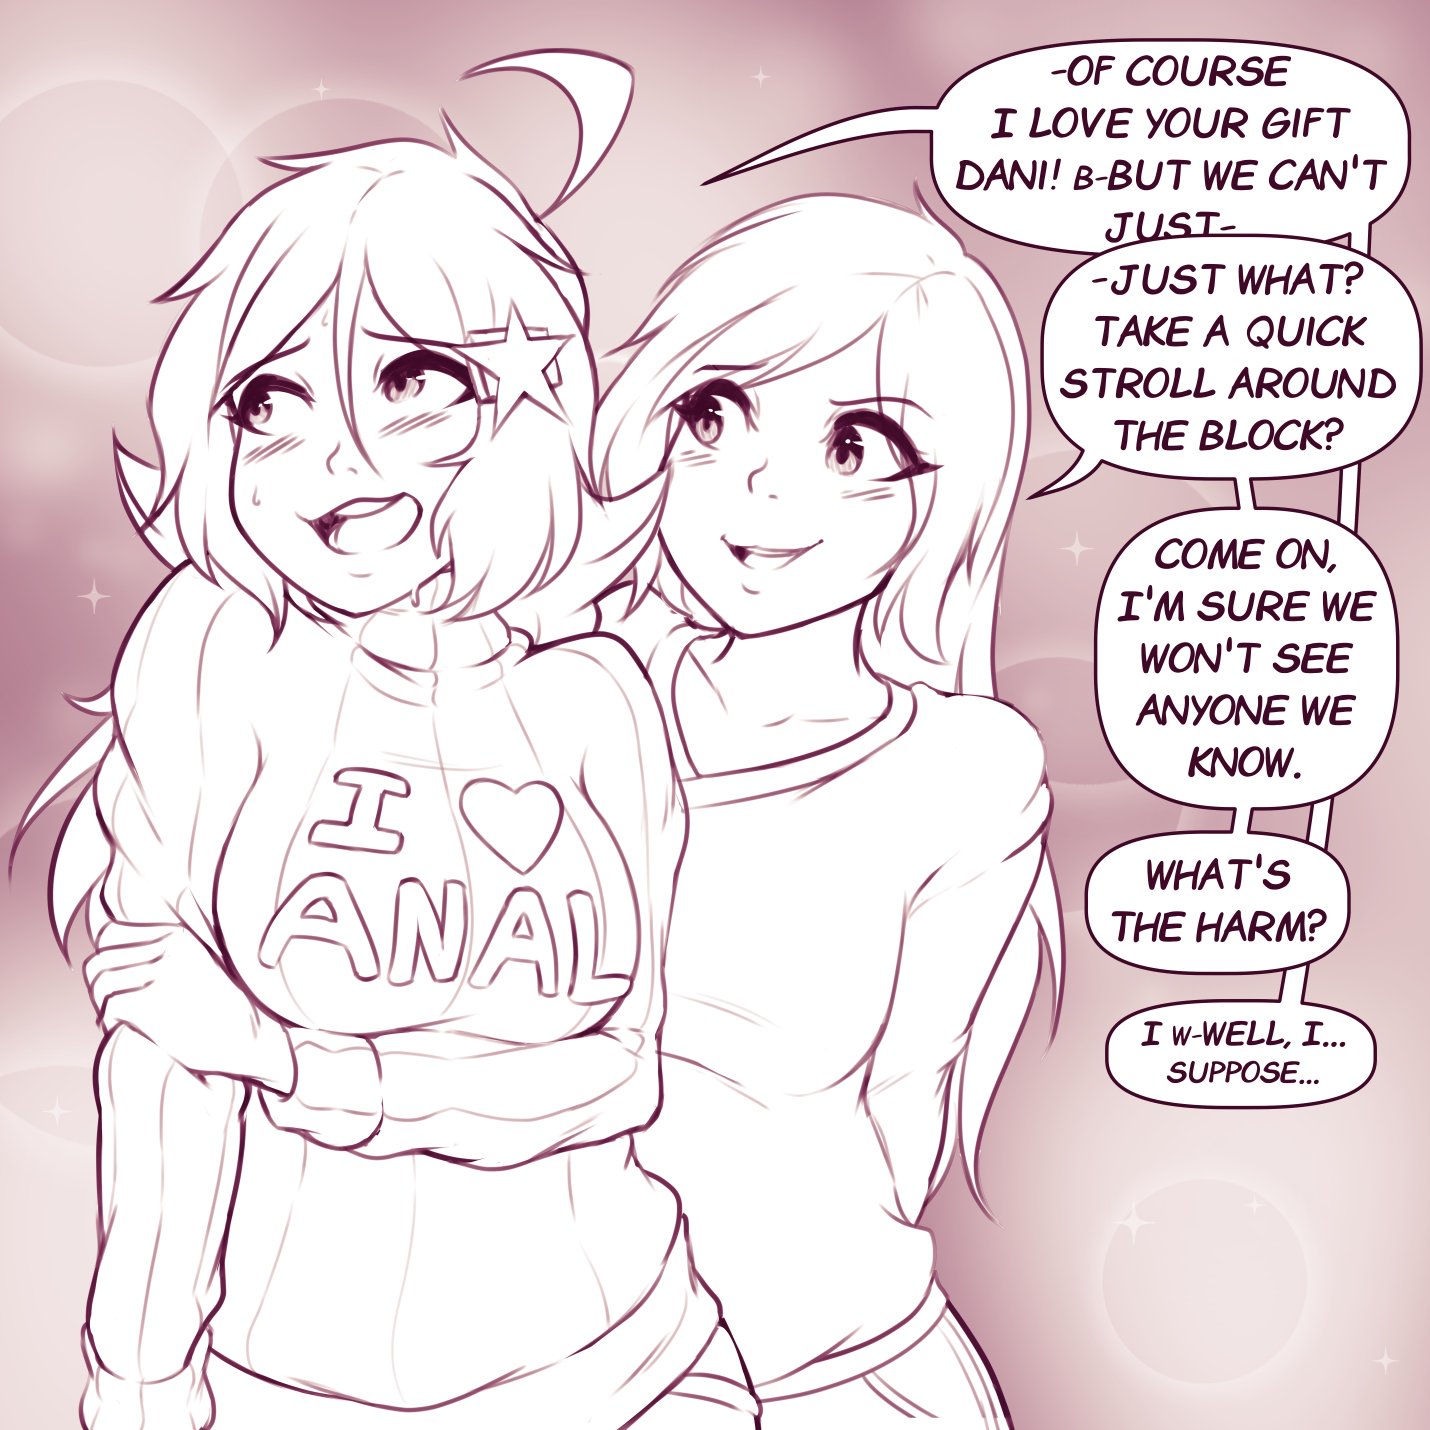 Starcross On Twitter Dani Finds A Perfect Sweater For Star As The